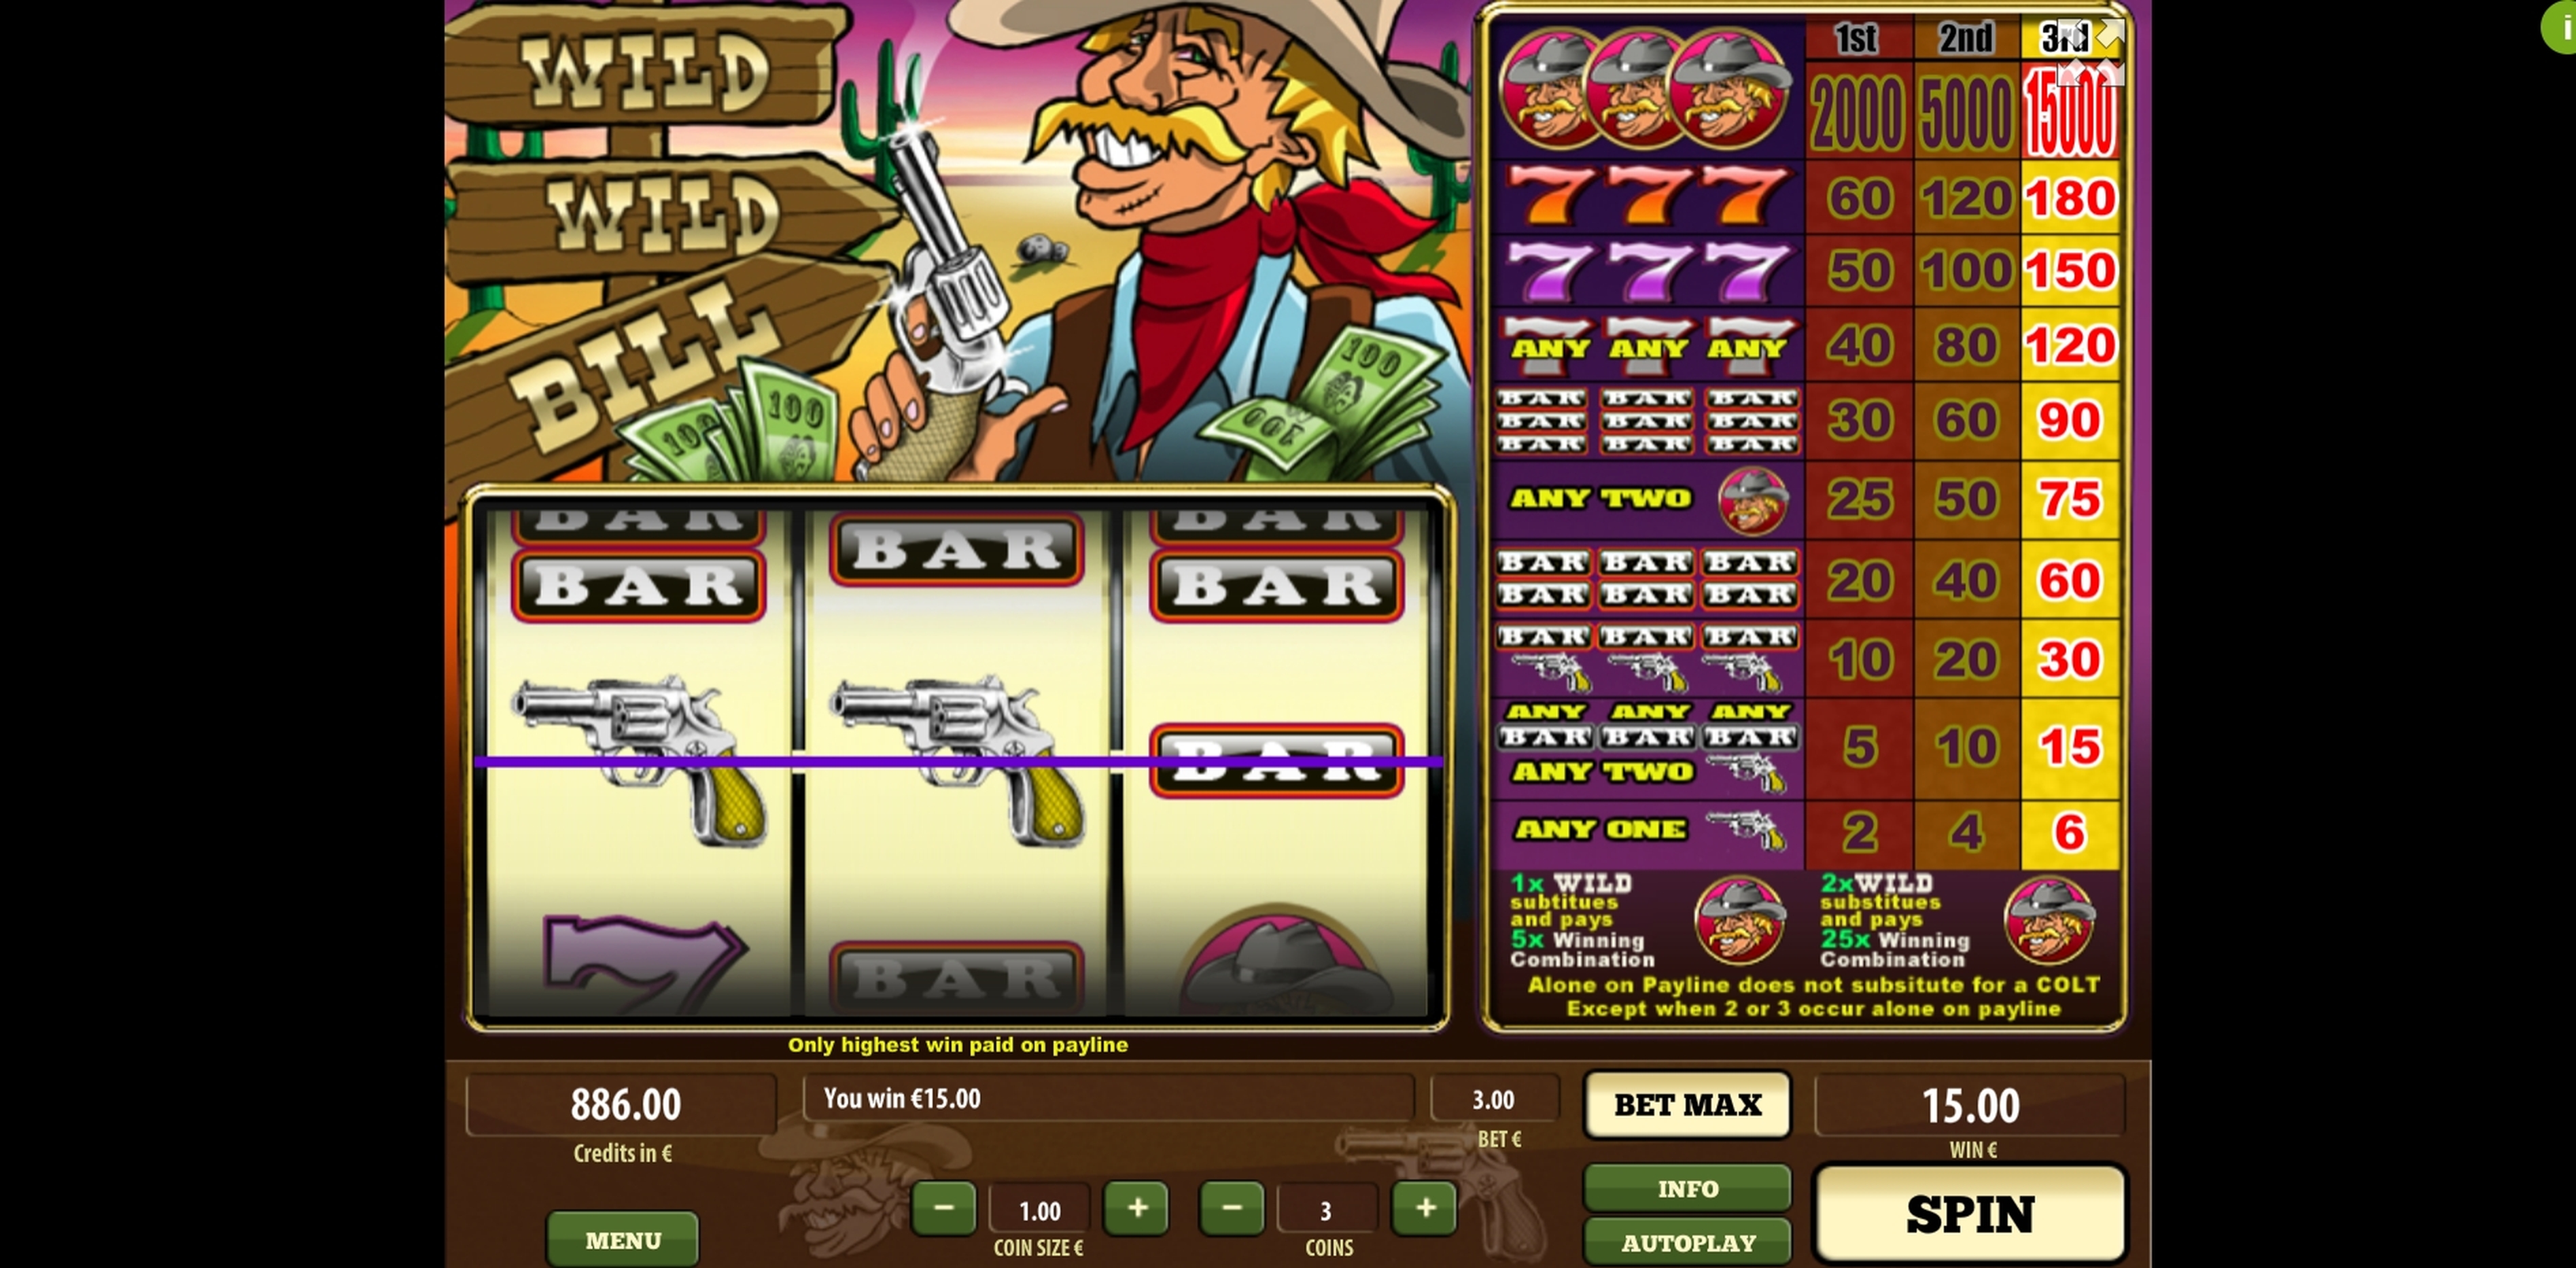 Win Money in Wild Wild Bill Free Slot Game by Tom Horn Gaming